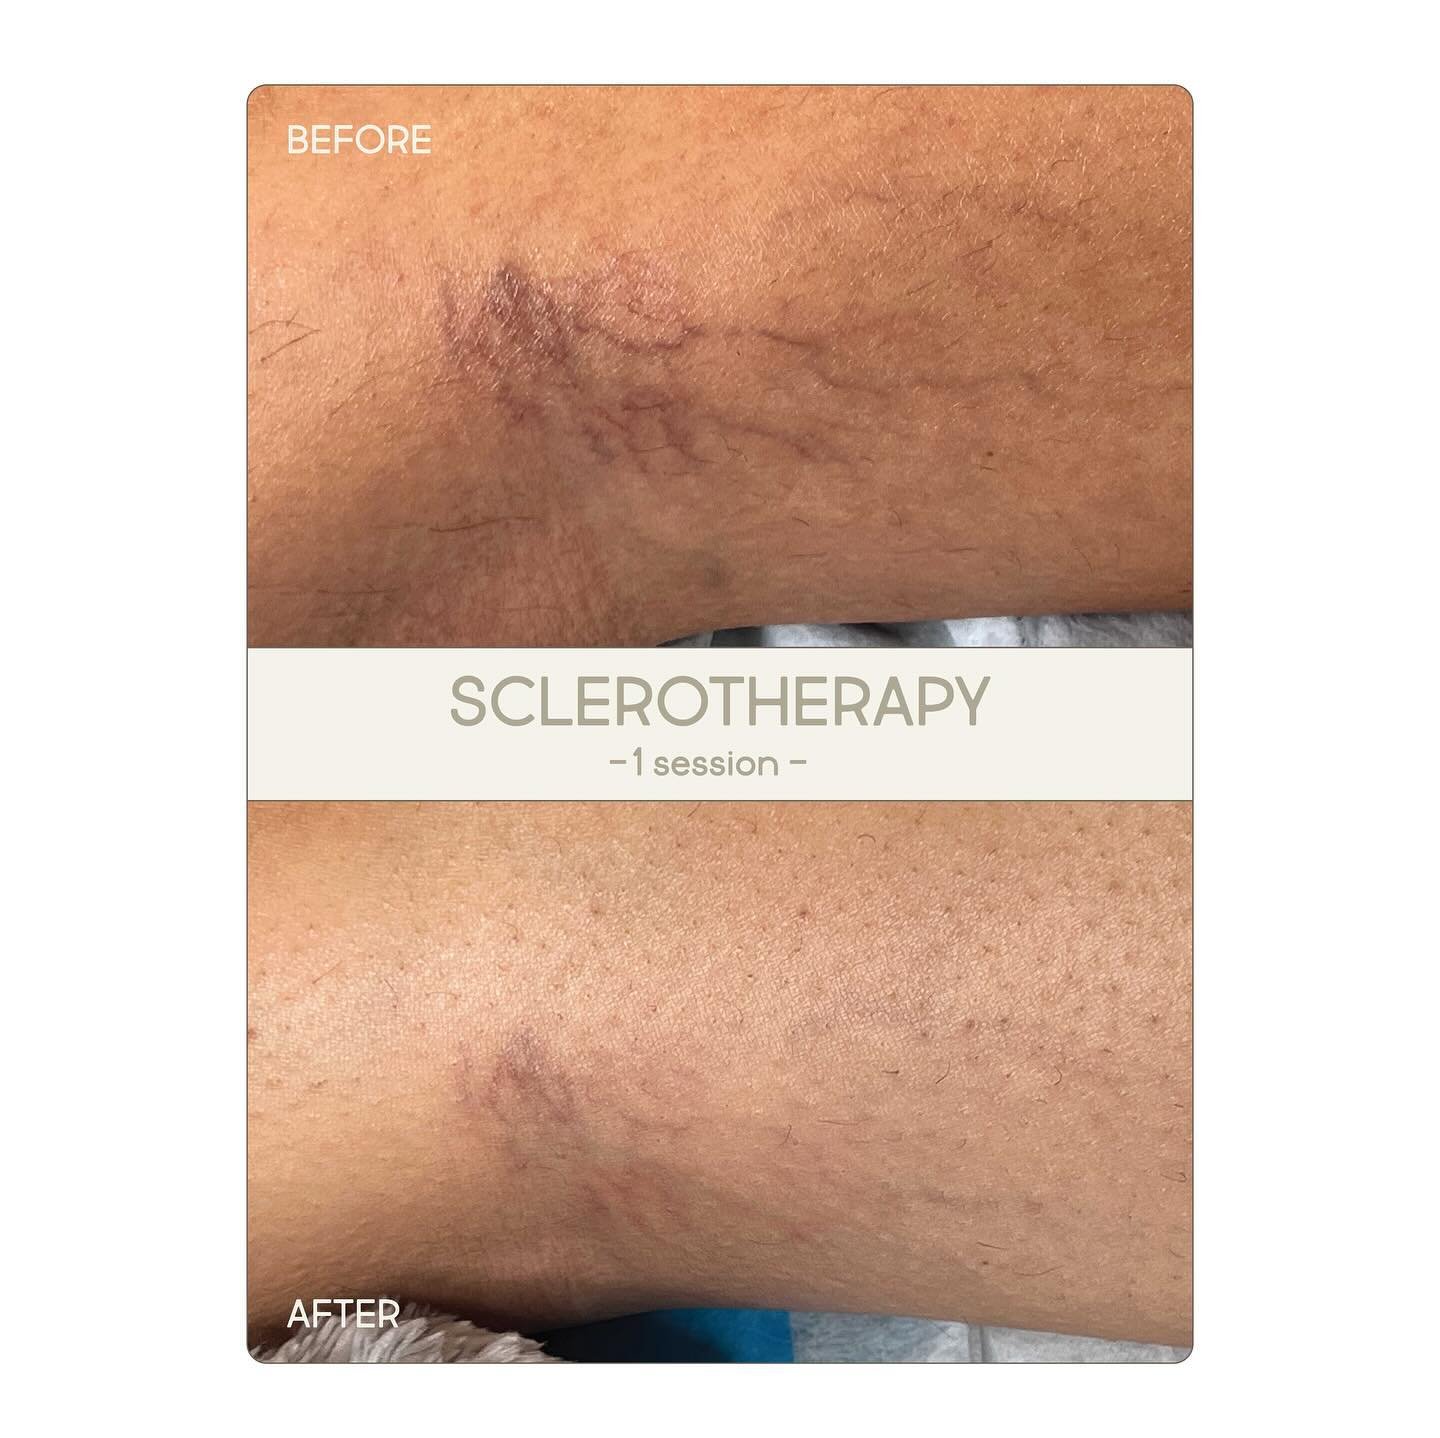 Mother&rsquo;s Day Flash Sale
⭐️SCLEROTHERAPY⭐️

Promo:
- Buy one get one free session
- Call and prepay
- Valid thru 5/10-5/12

How to kiss stubborn veins goodbye 💋
A non-surgical, minimally invasive treatment removing varicose and spider veins usi